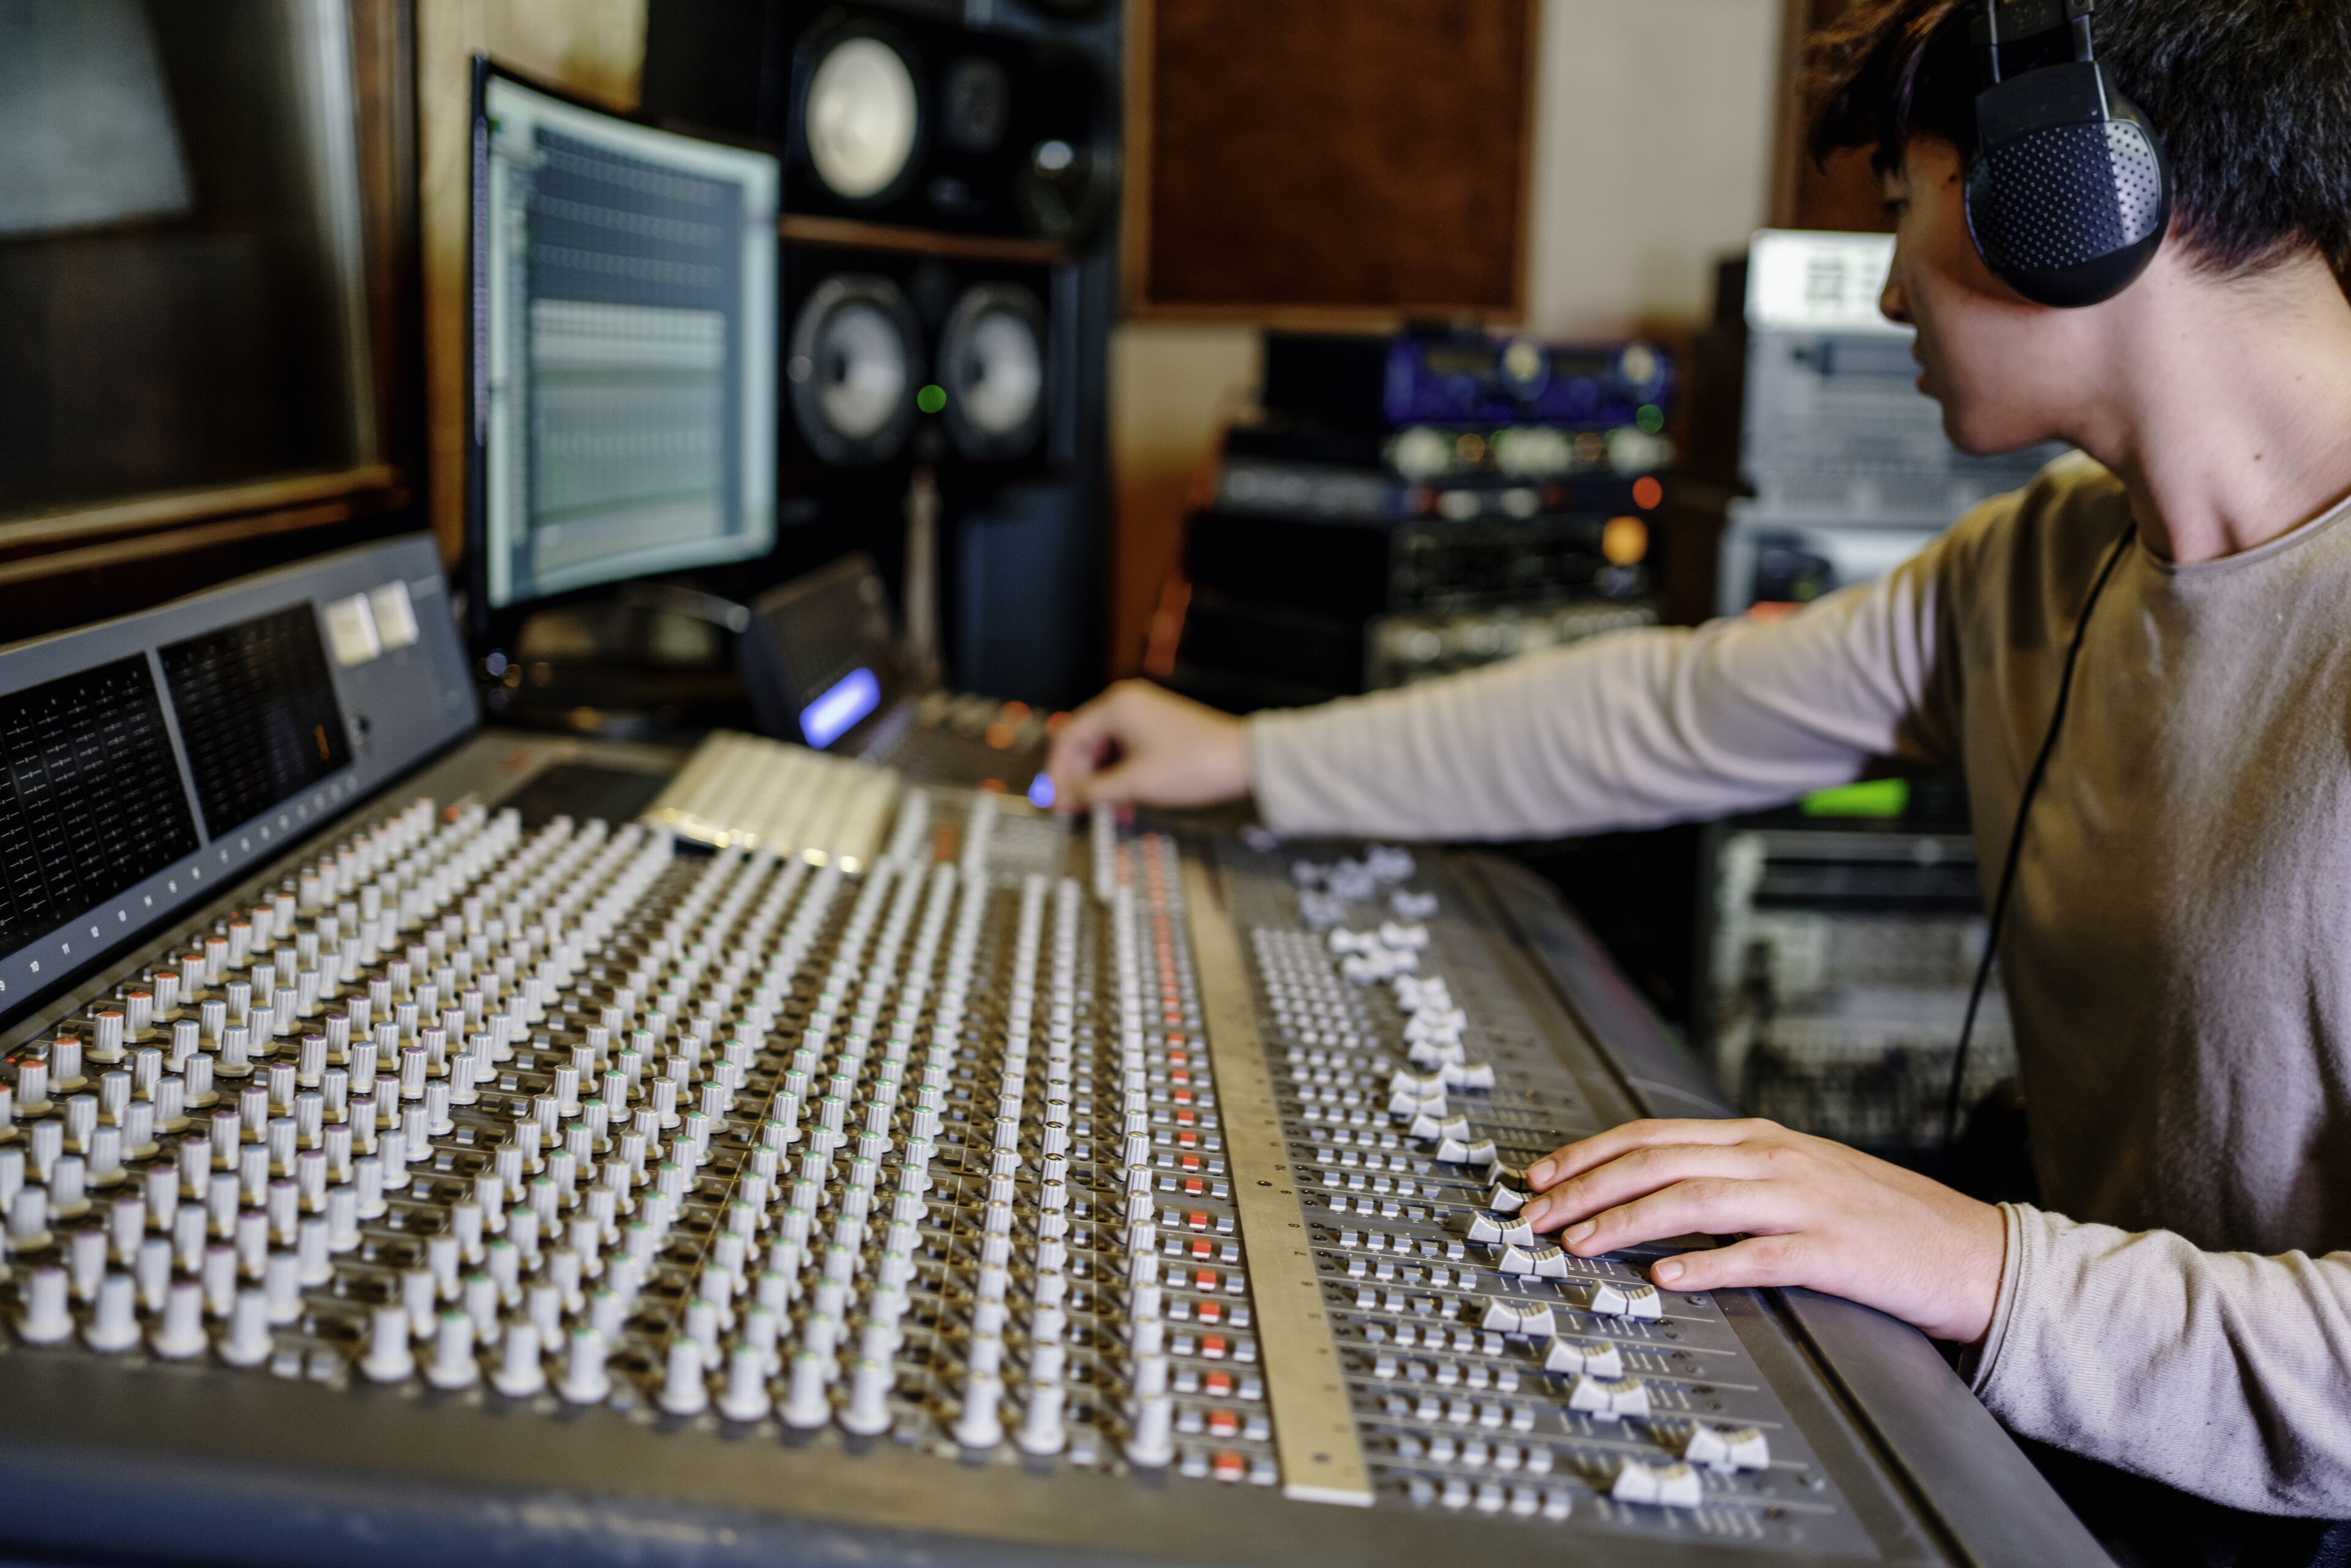 Person adjusting audio levels on a professional mixing console in a studio setting.